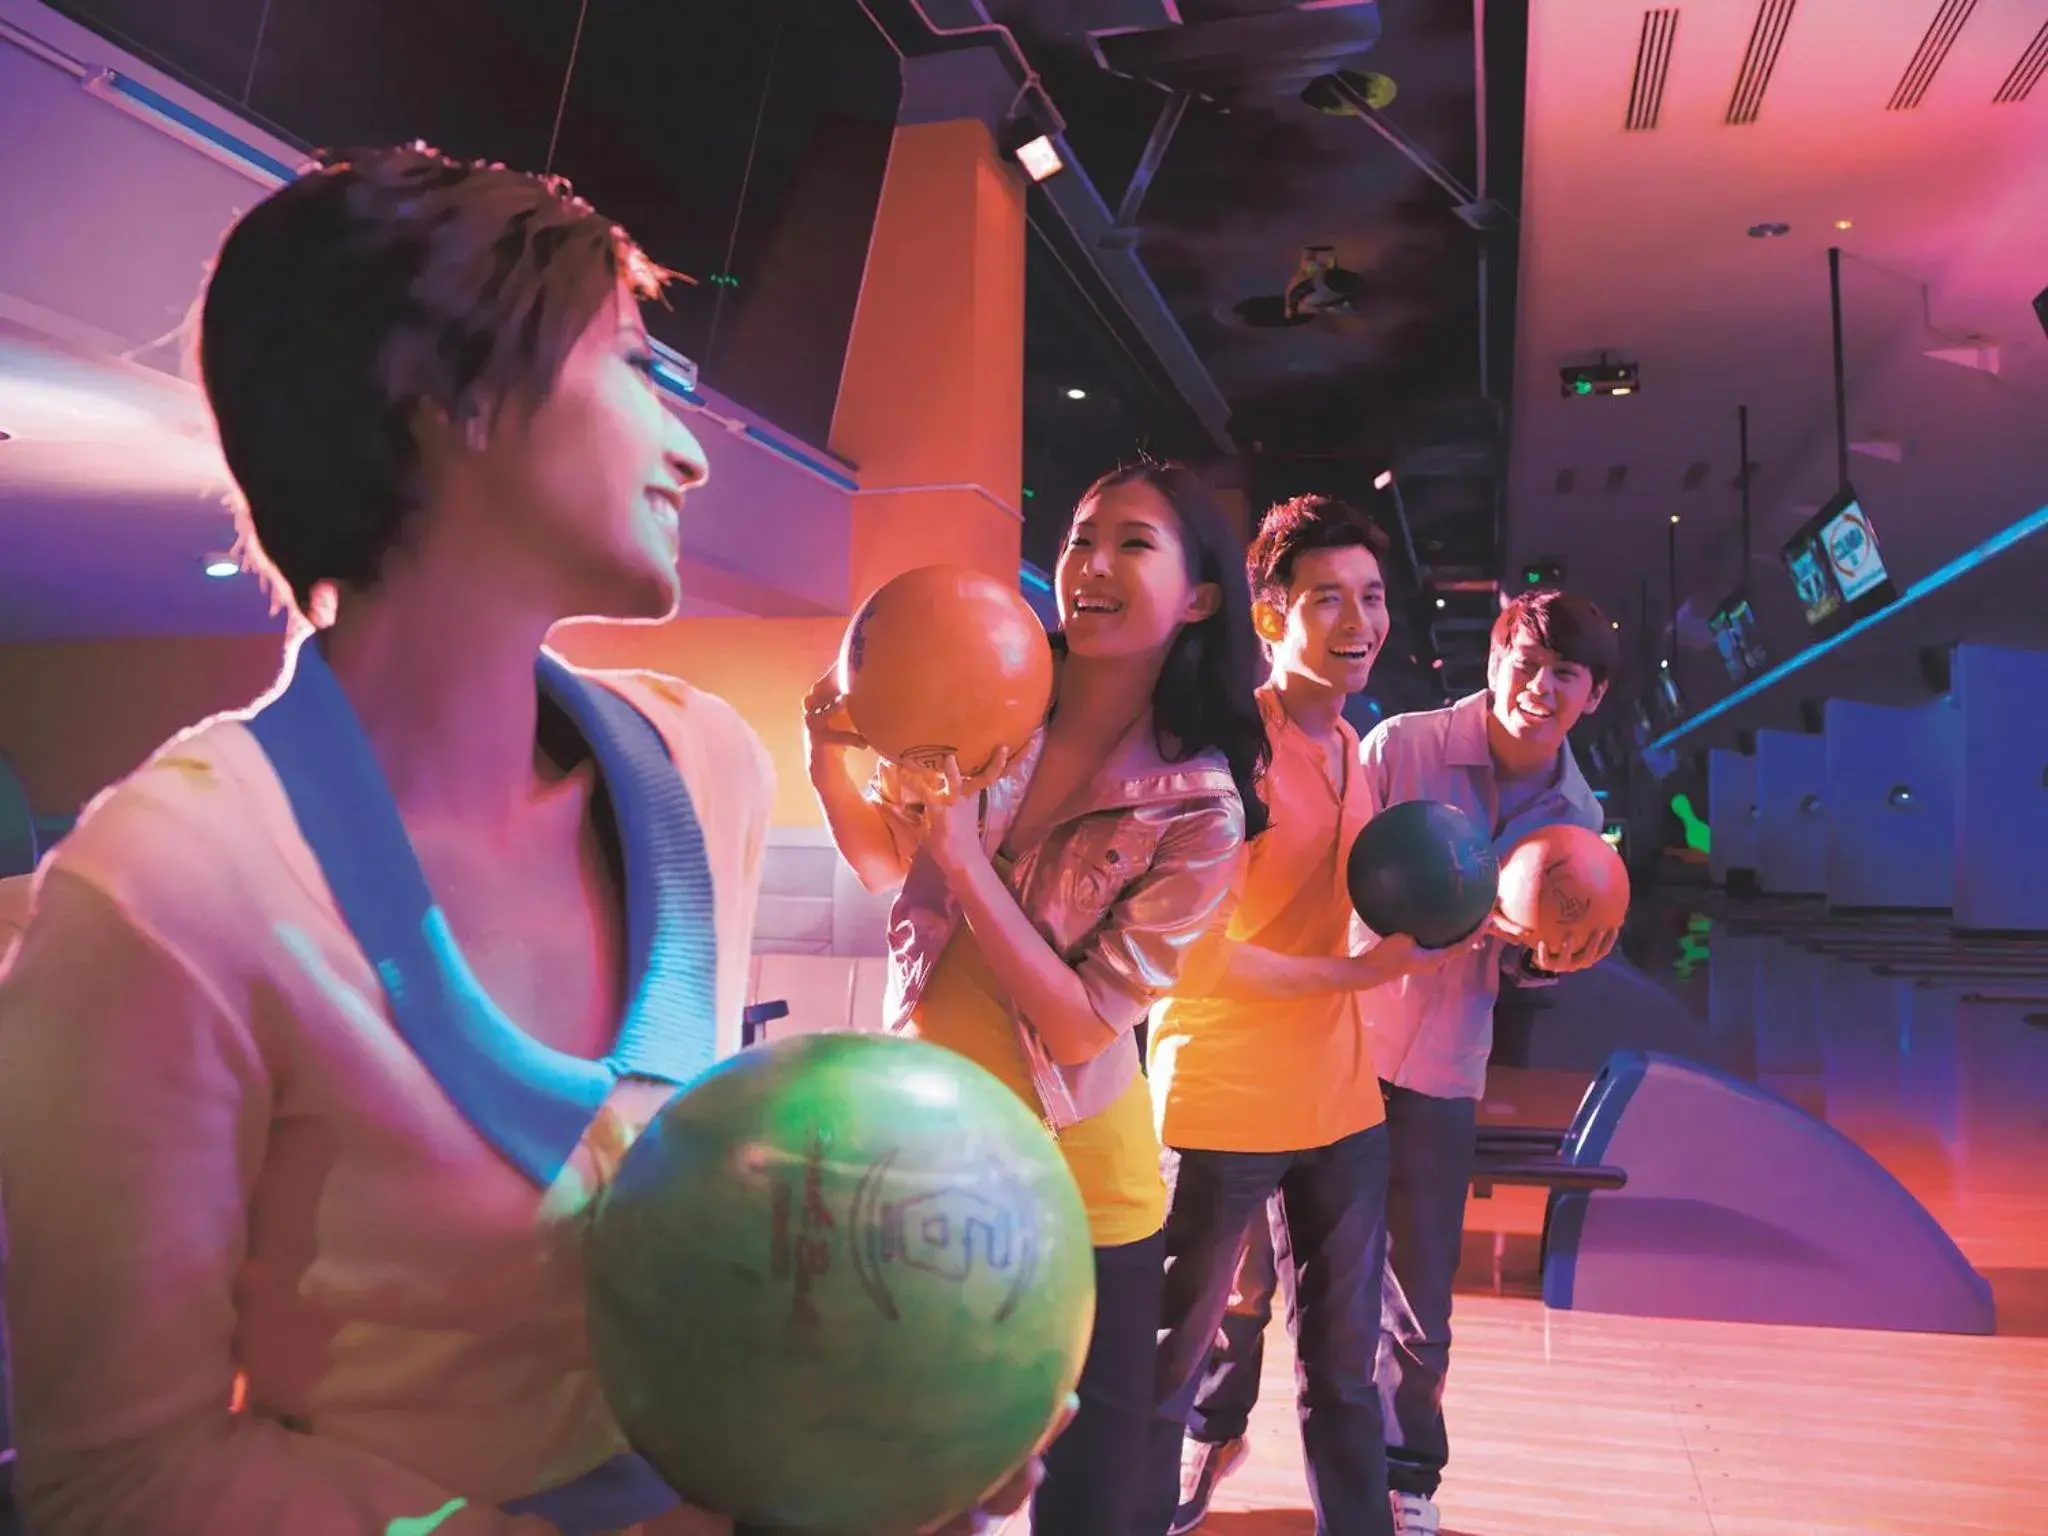 Bowling in Resorts World Genting - First World Hotel